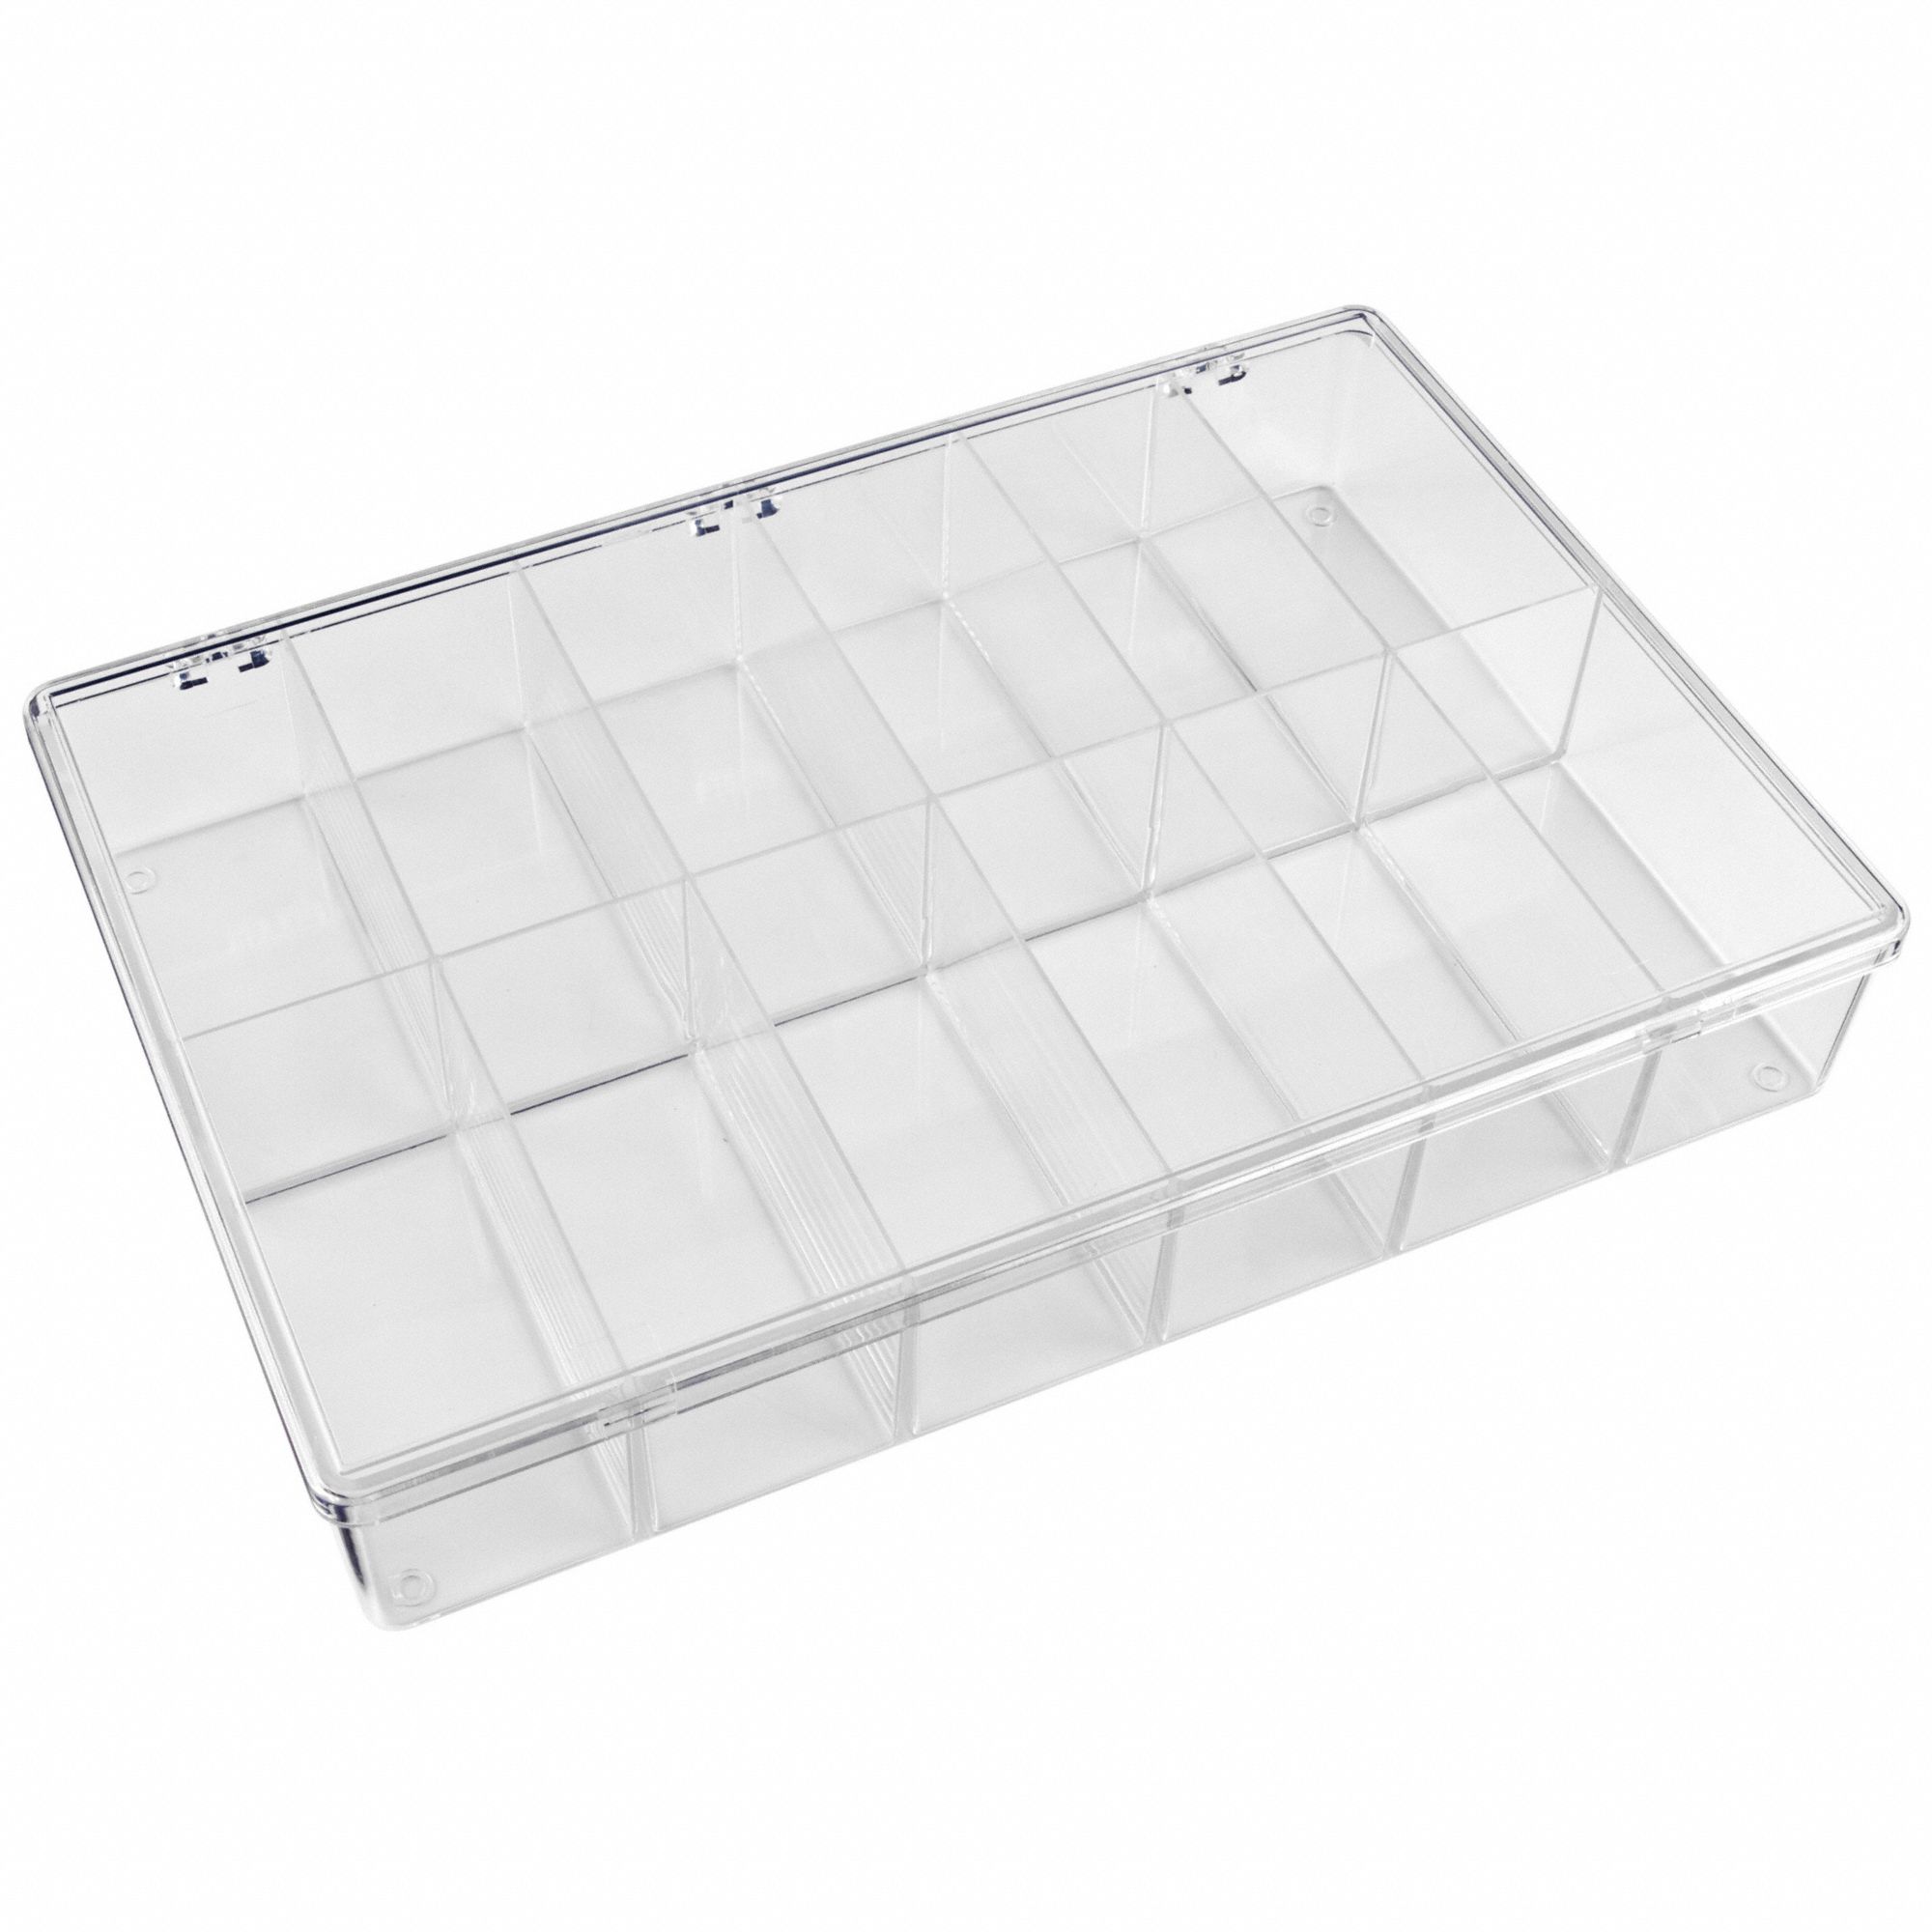 FLAMBEAU, 13 in x 2 7/8 in, Clear, Compartment Box - 2W469|6676KC ...